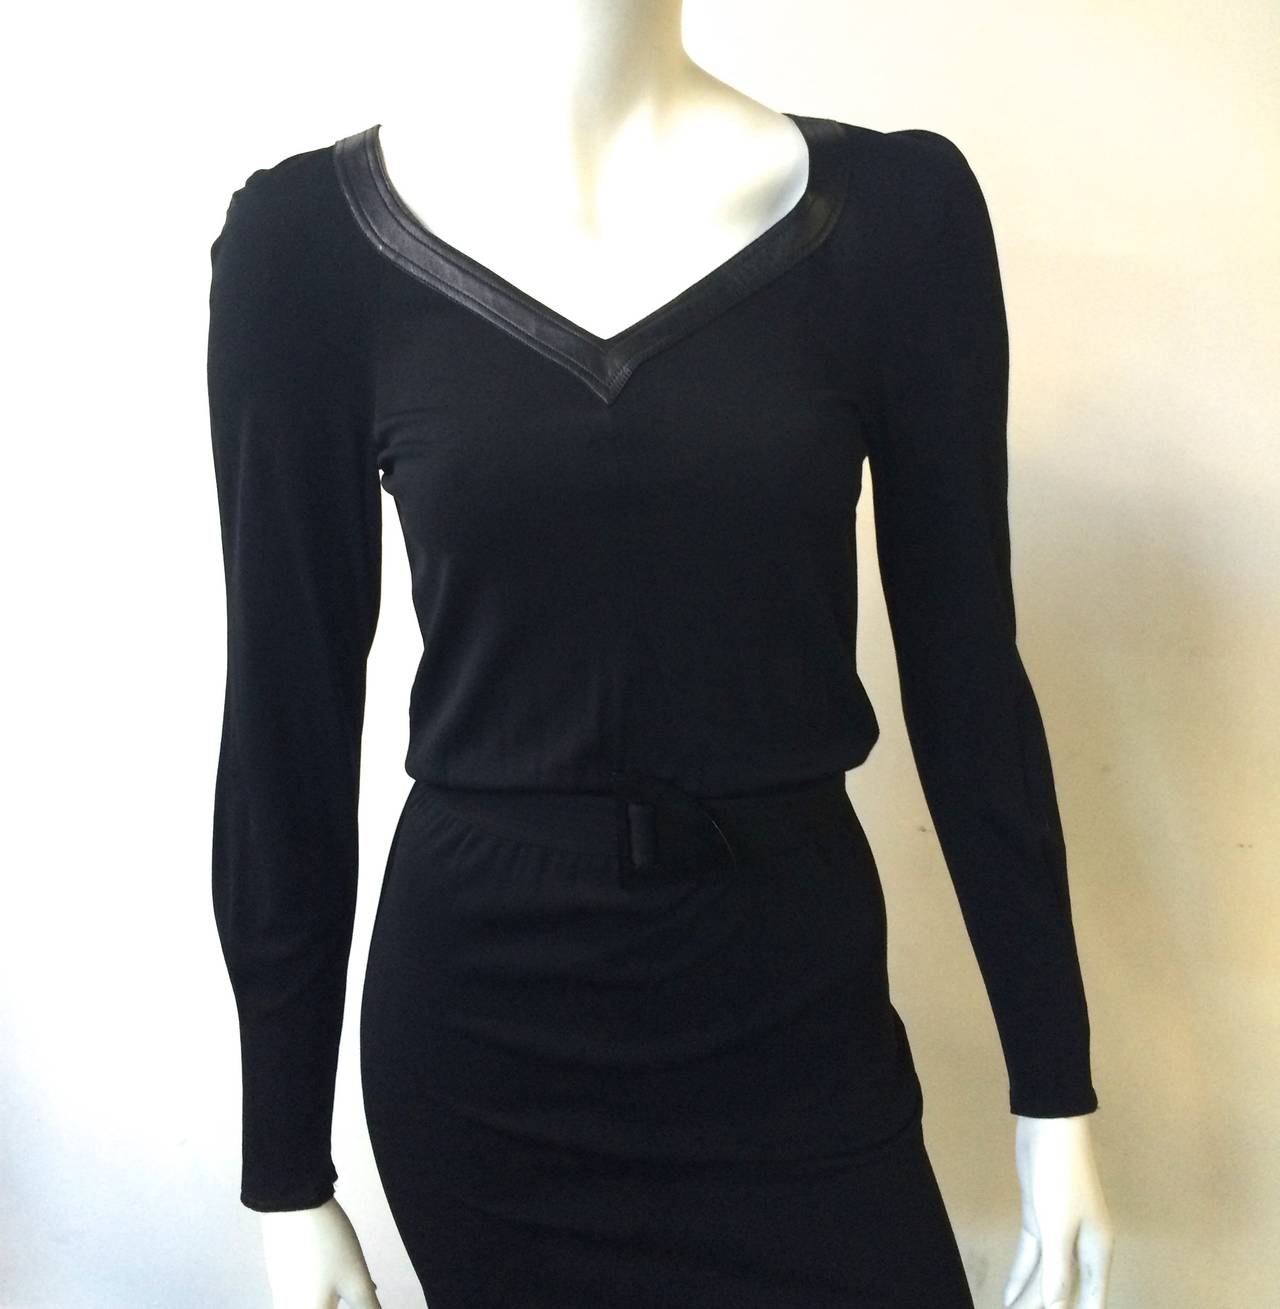 Jean Muir for Neiman Marcus 1980s LBD has an elastic waistband with the most amazing modern belt buckle on the planet will fit a size 4/6.  Ladies please grab your tape measure so you can properly measure your bust, waist & hips to make certain this